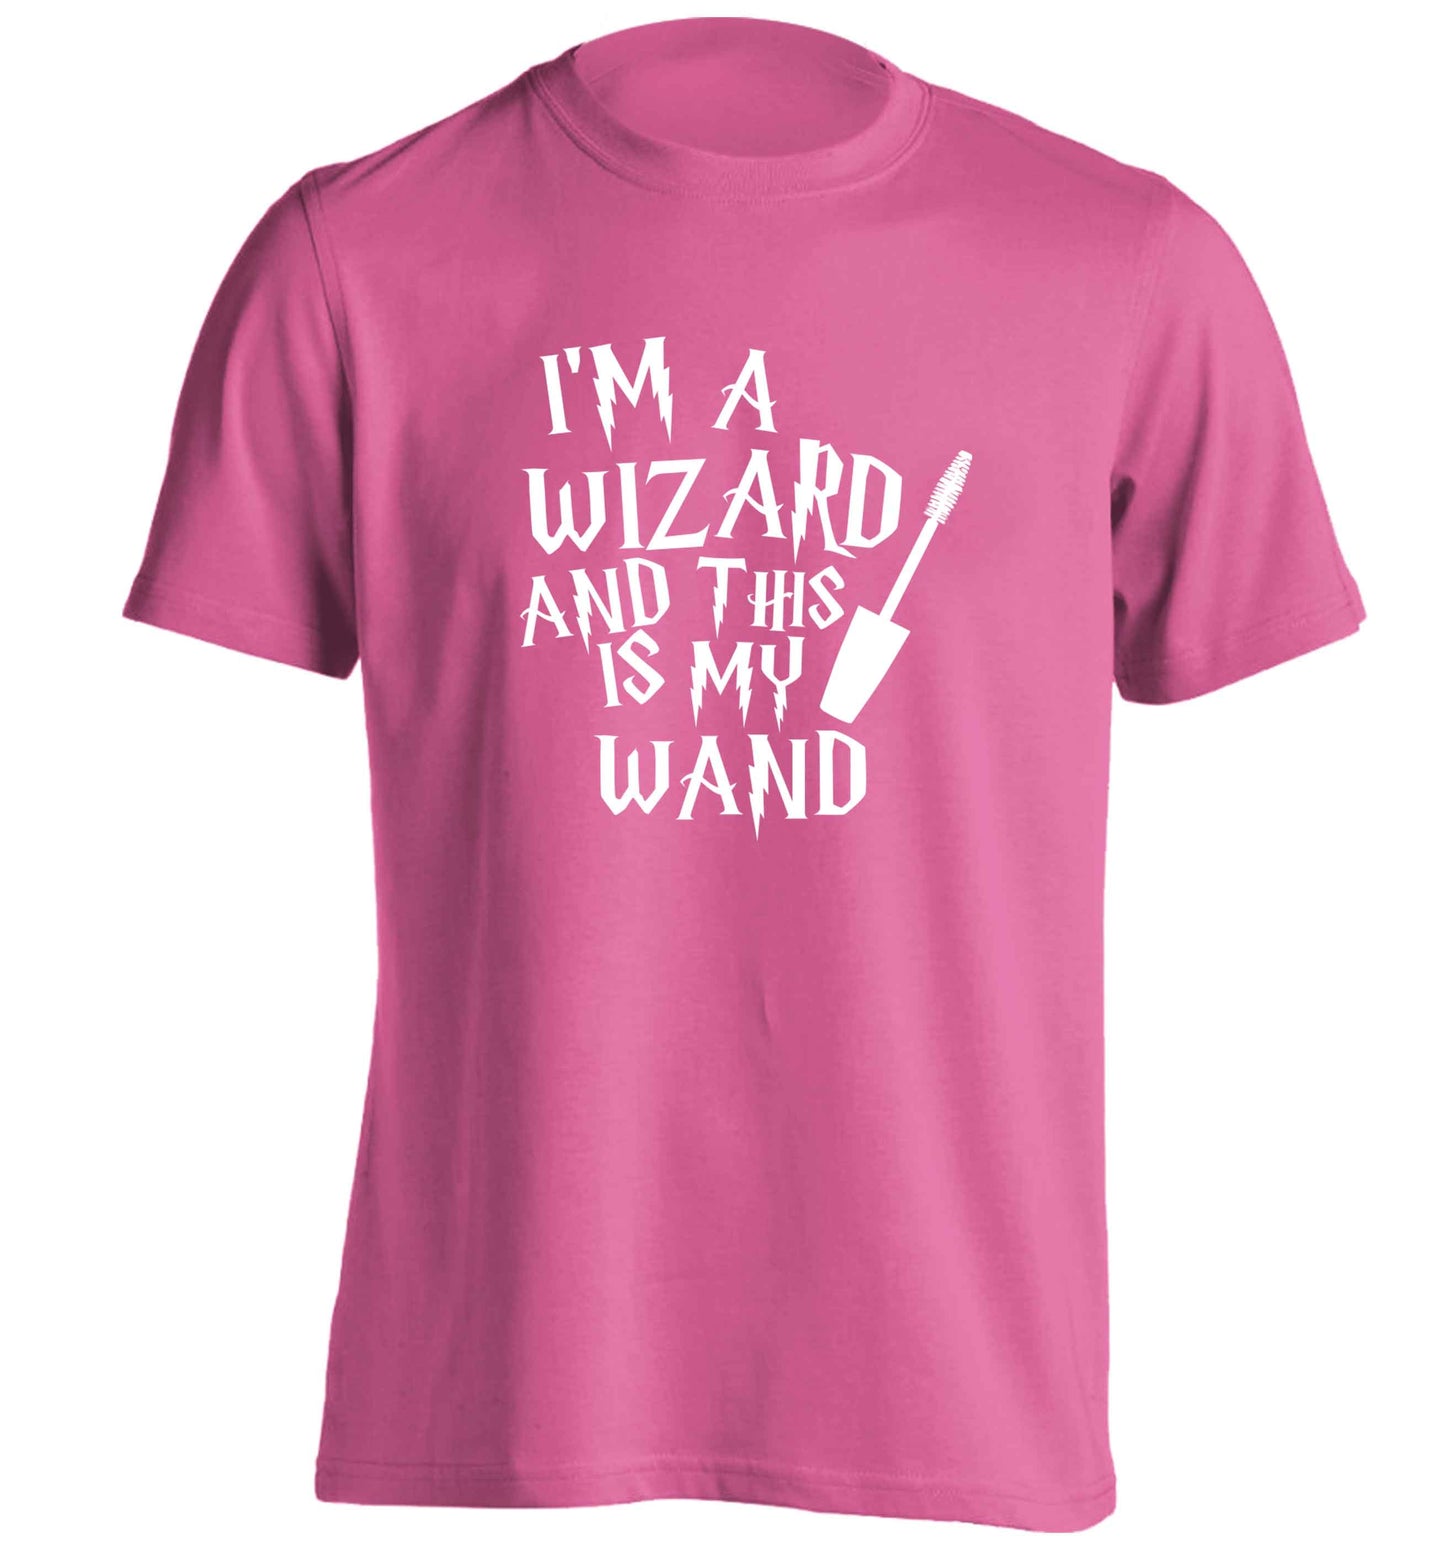 I'm a wizard and this is my wand adults unisex pink Tshirt 2XL